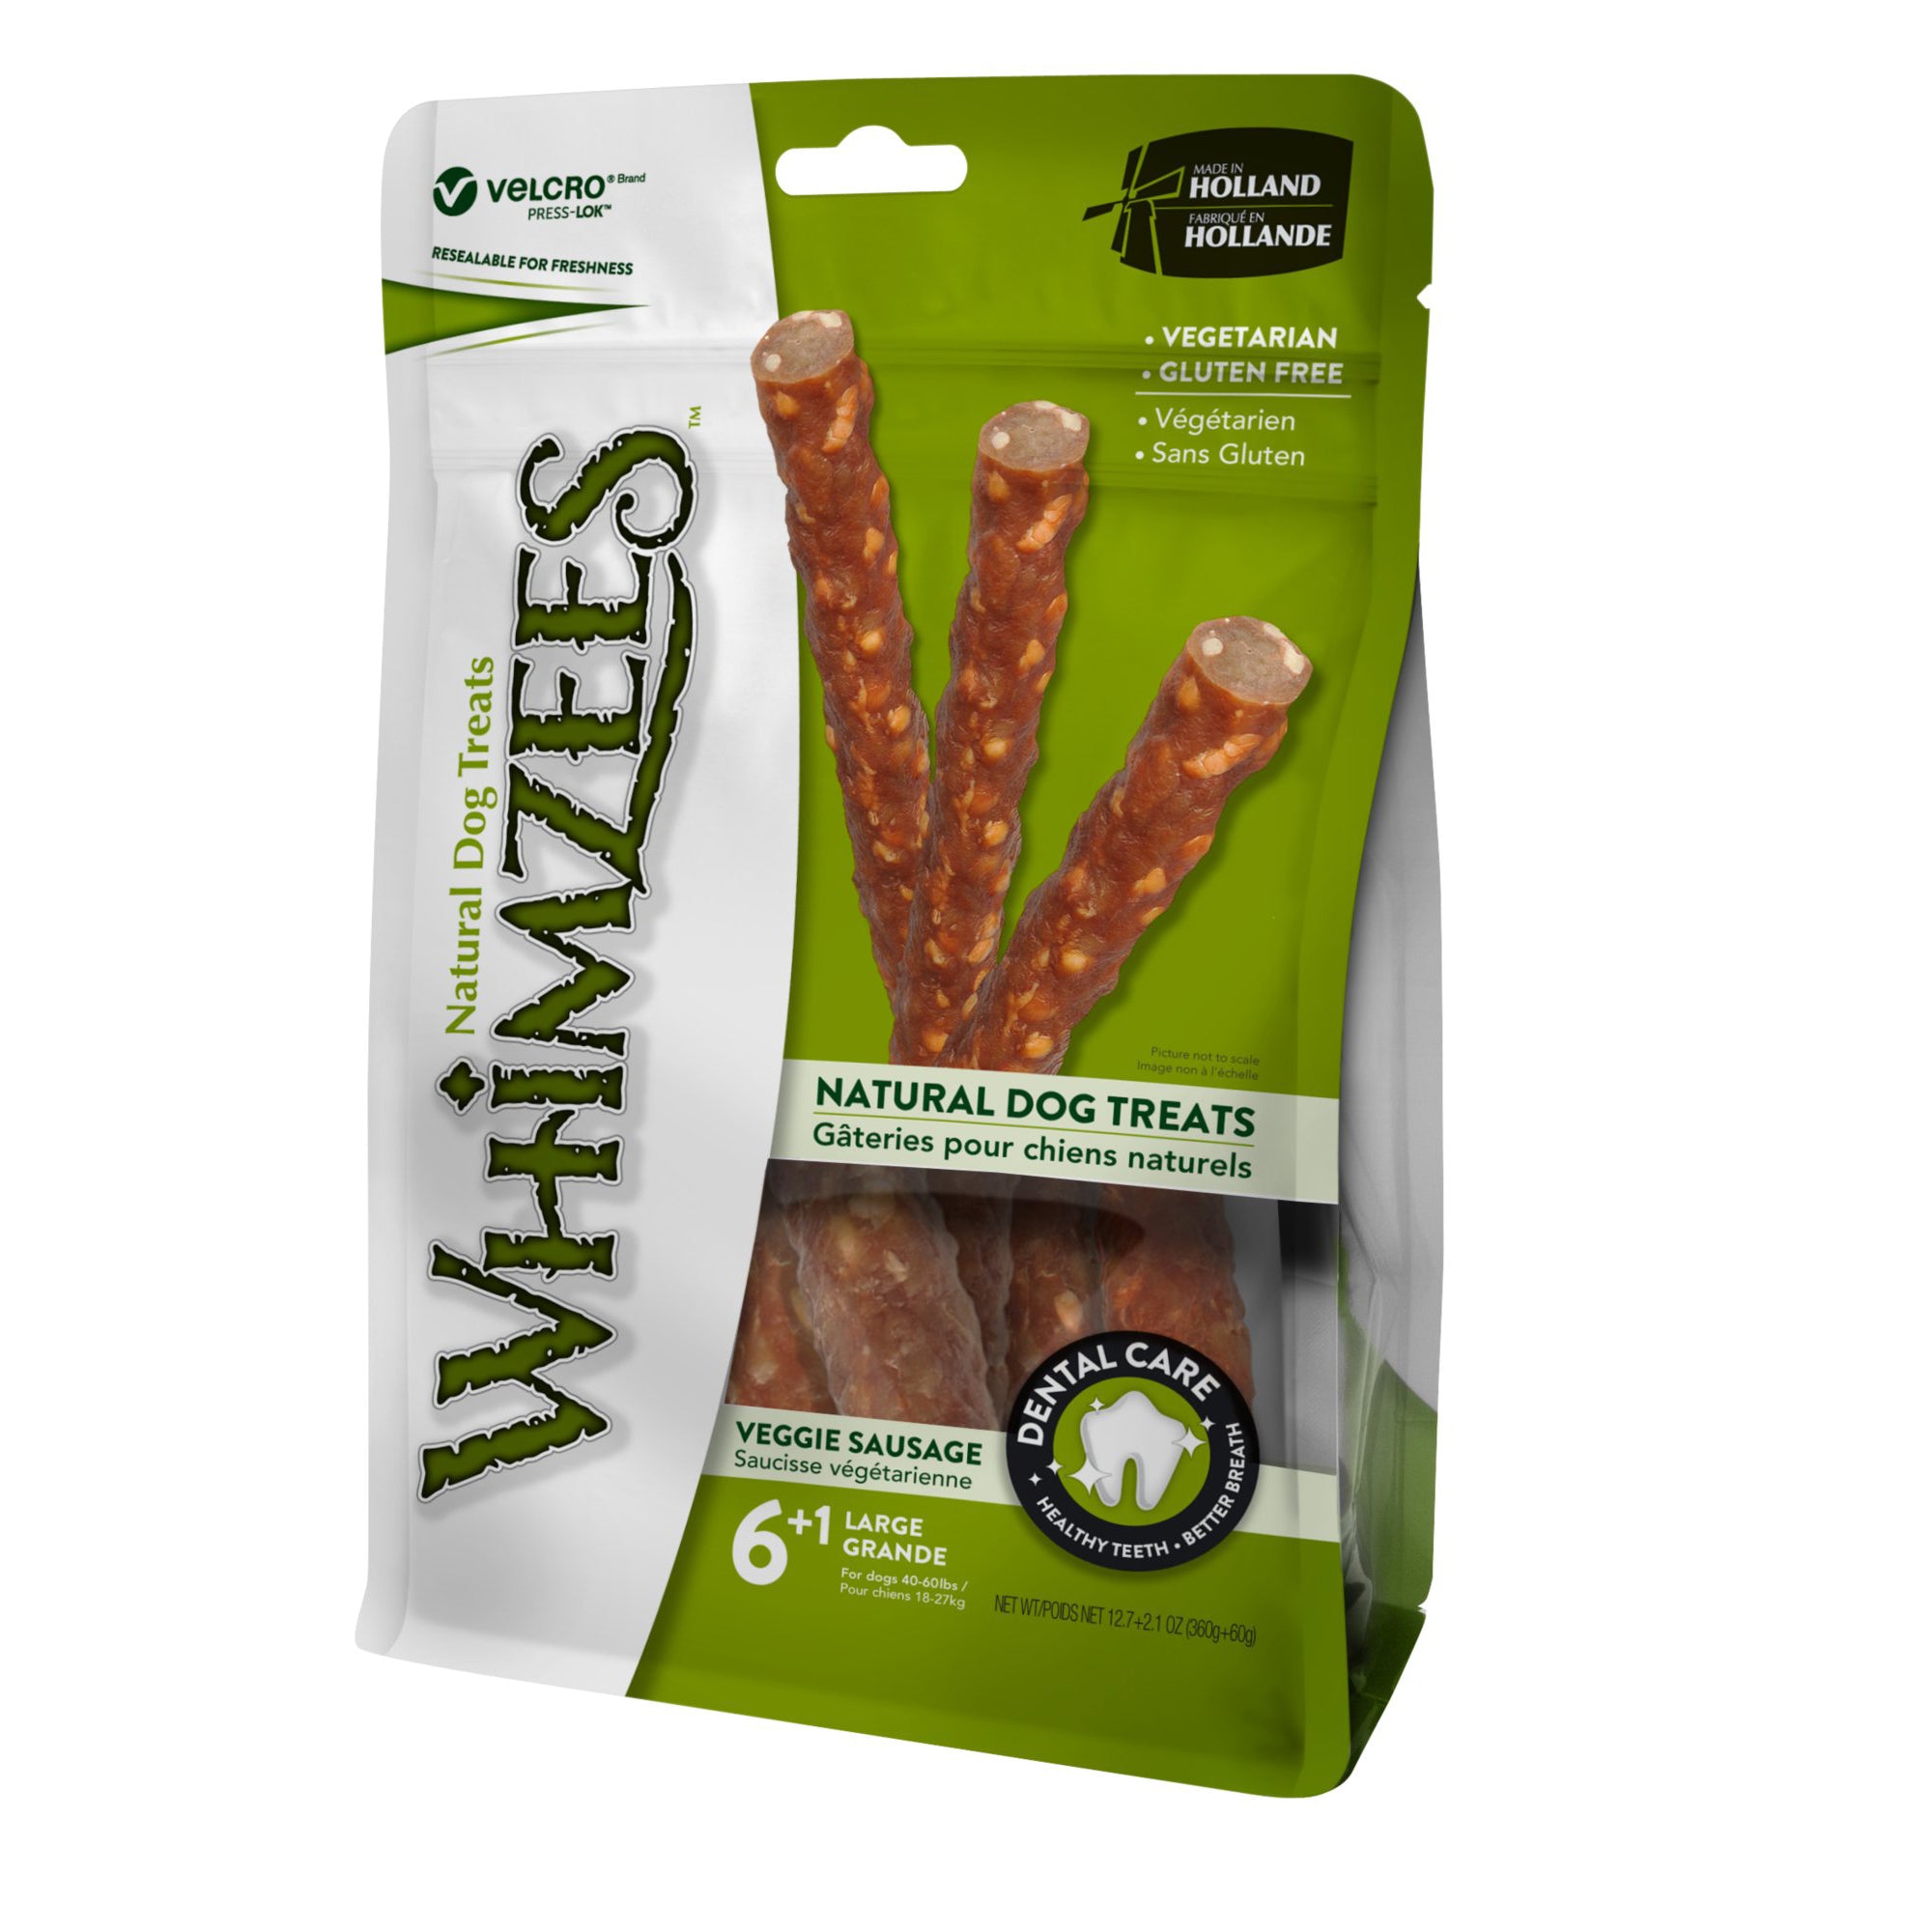 Whimzees Veggie Sausage Value Pack - Large (for dogs 40-60 lbs.)